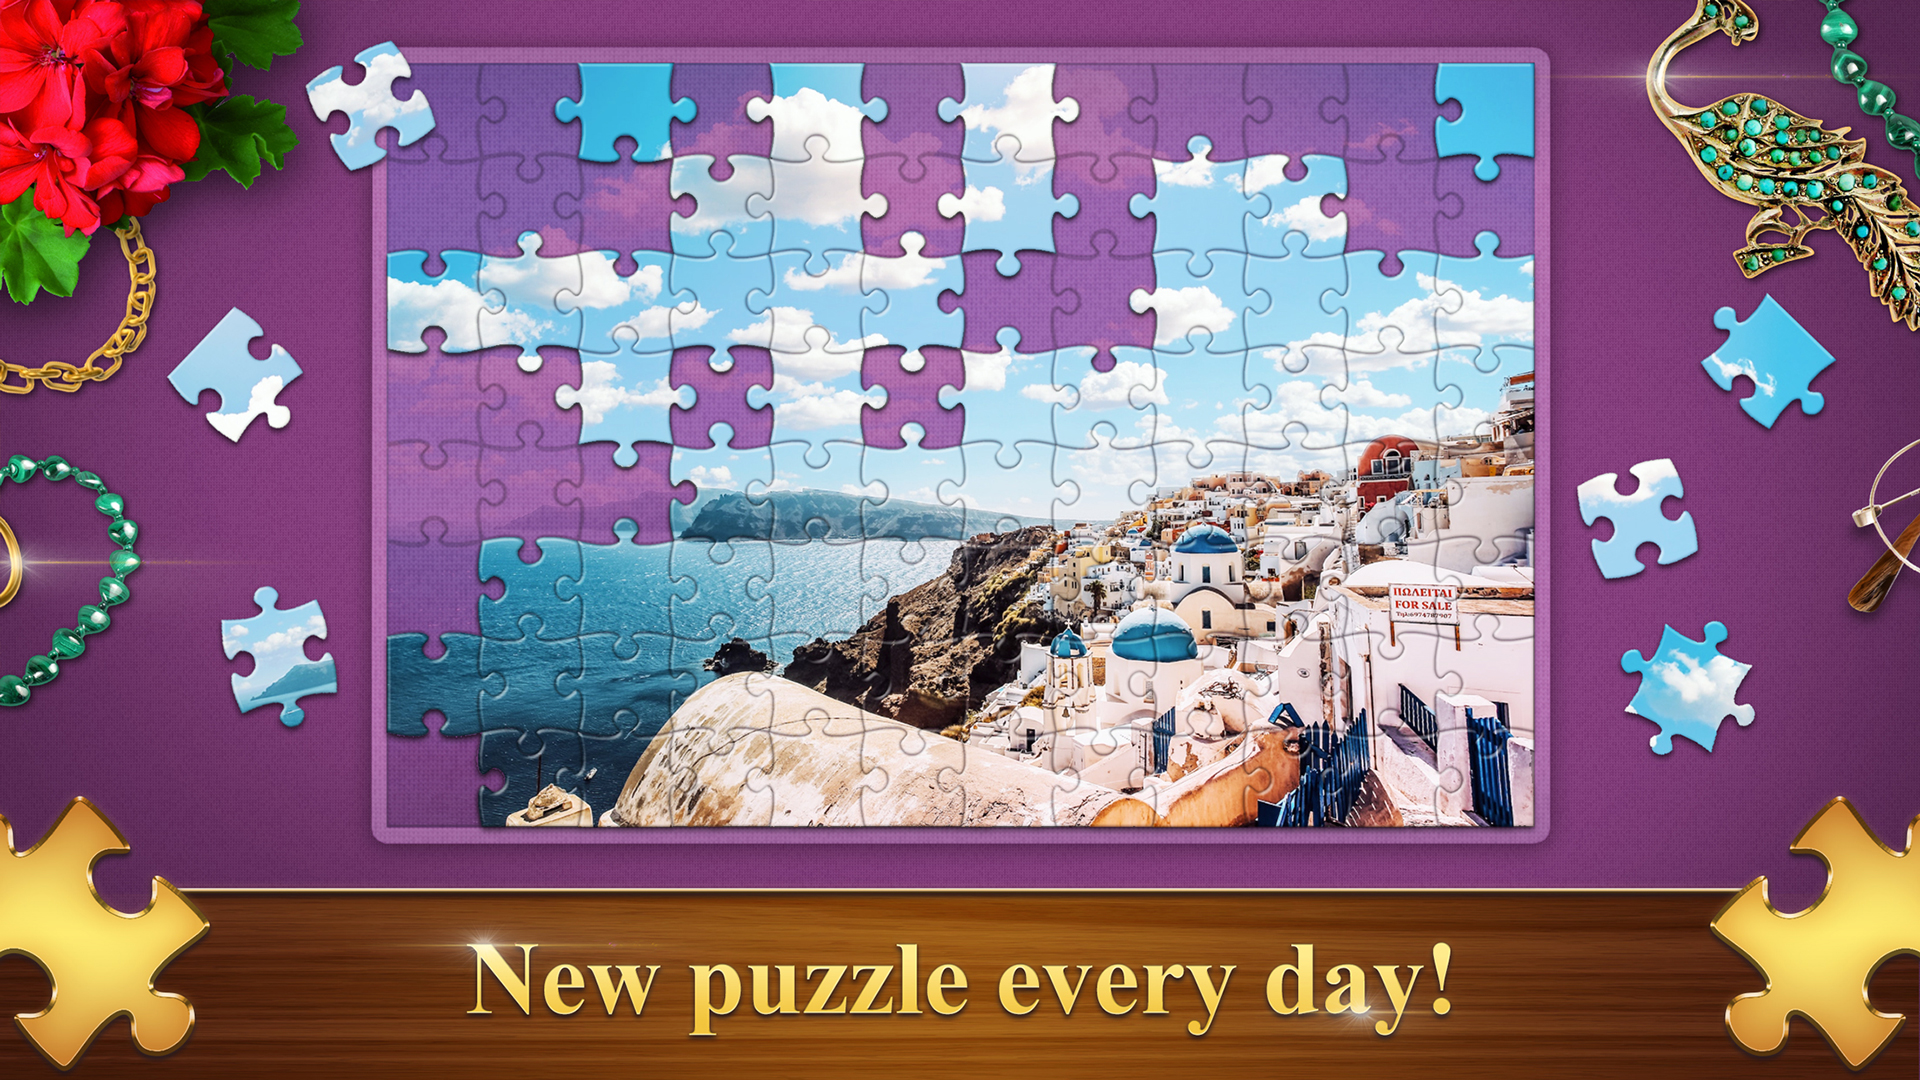 Favorite Puzzles - free classic hd puzzle jigsaw game for kids and